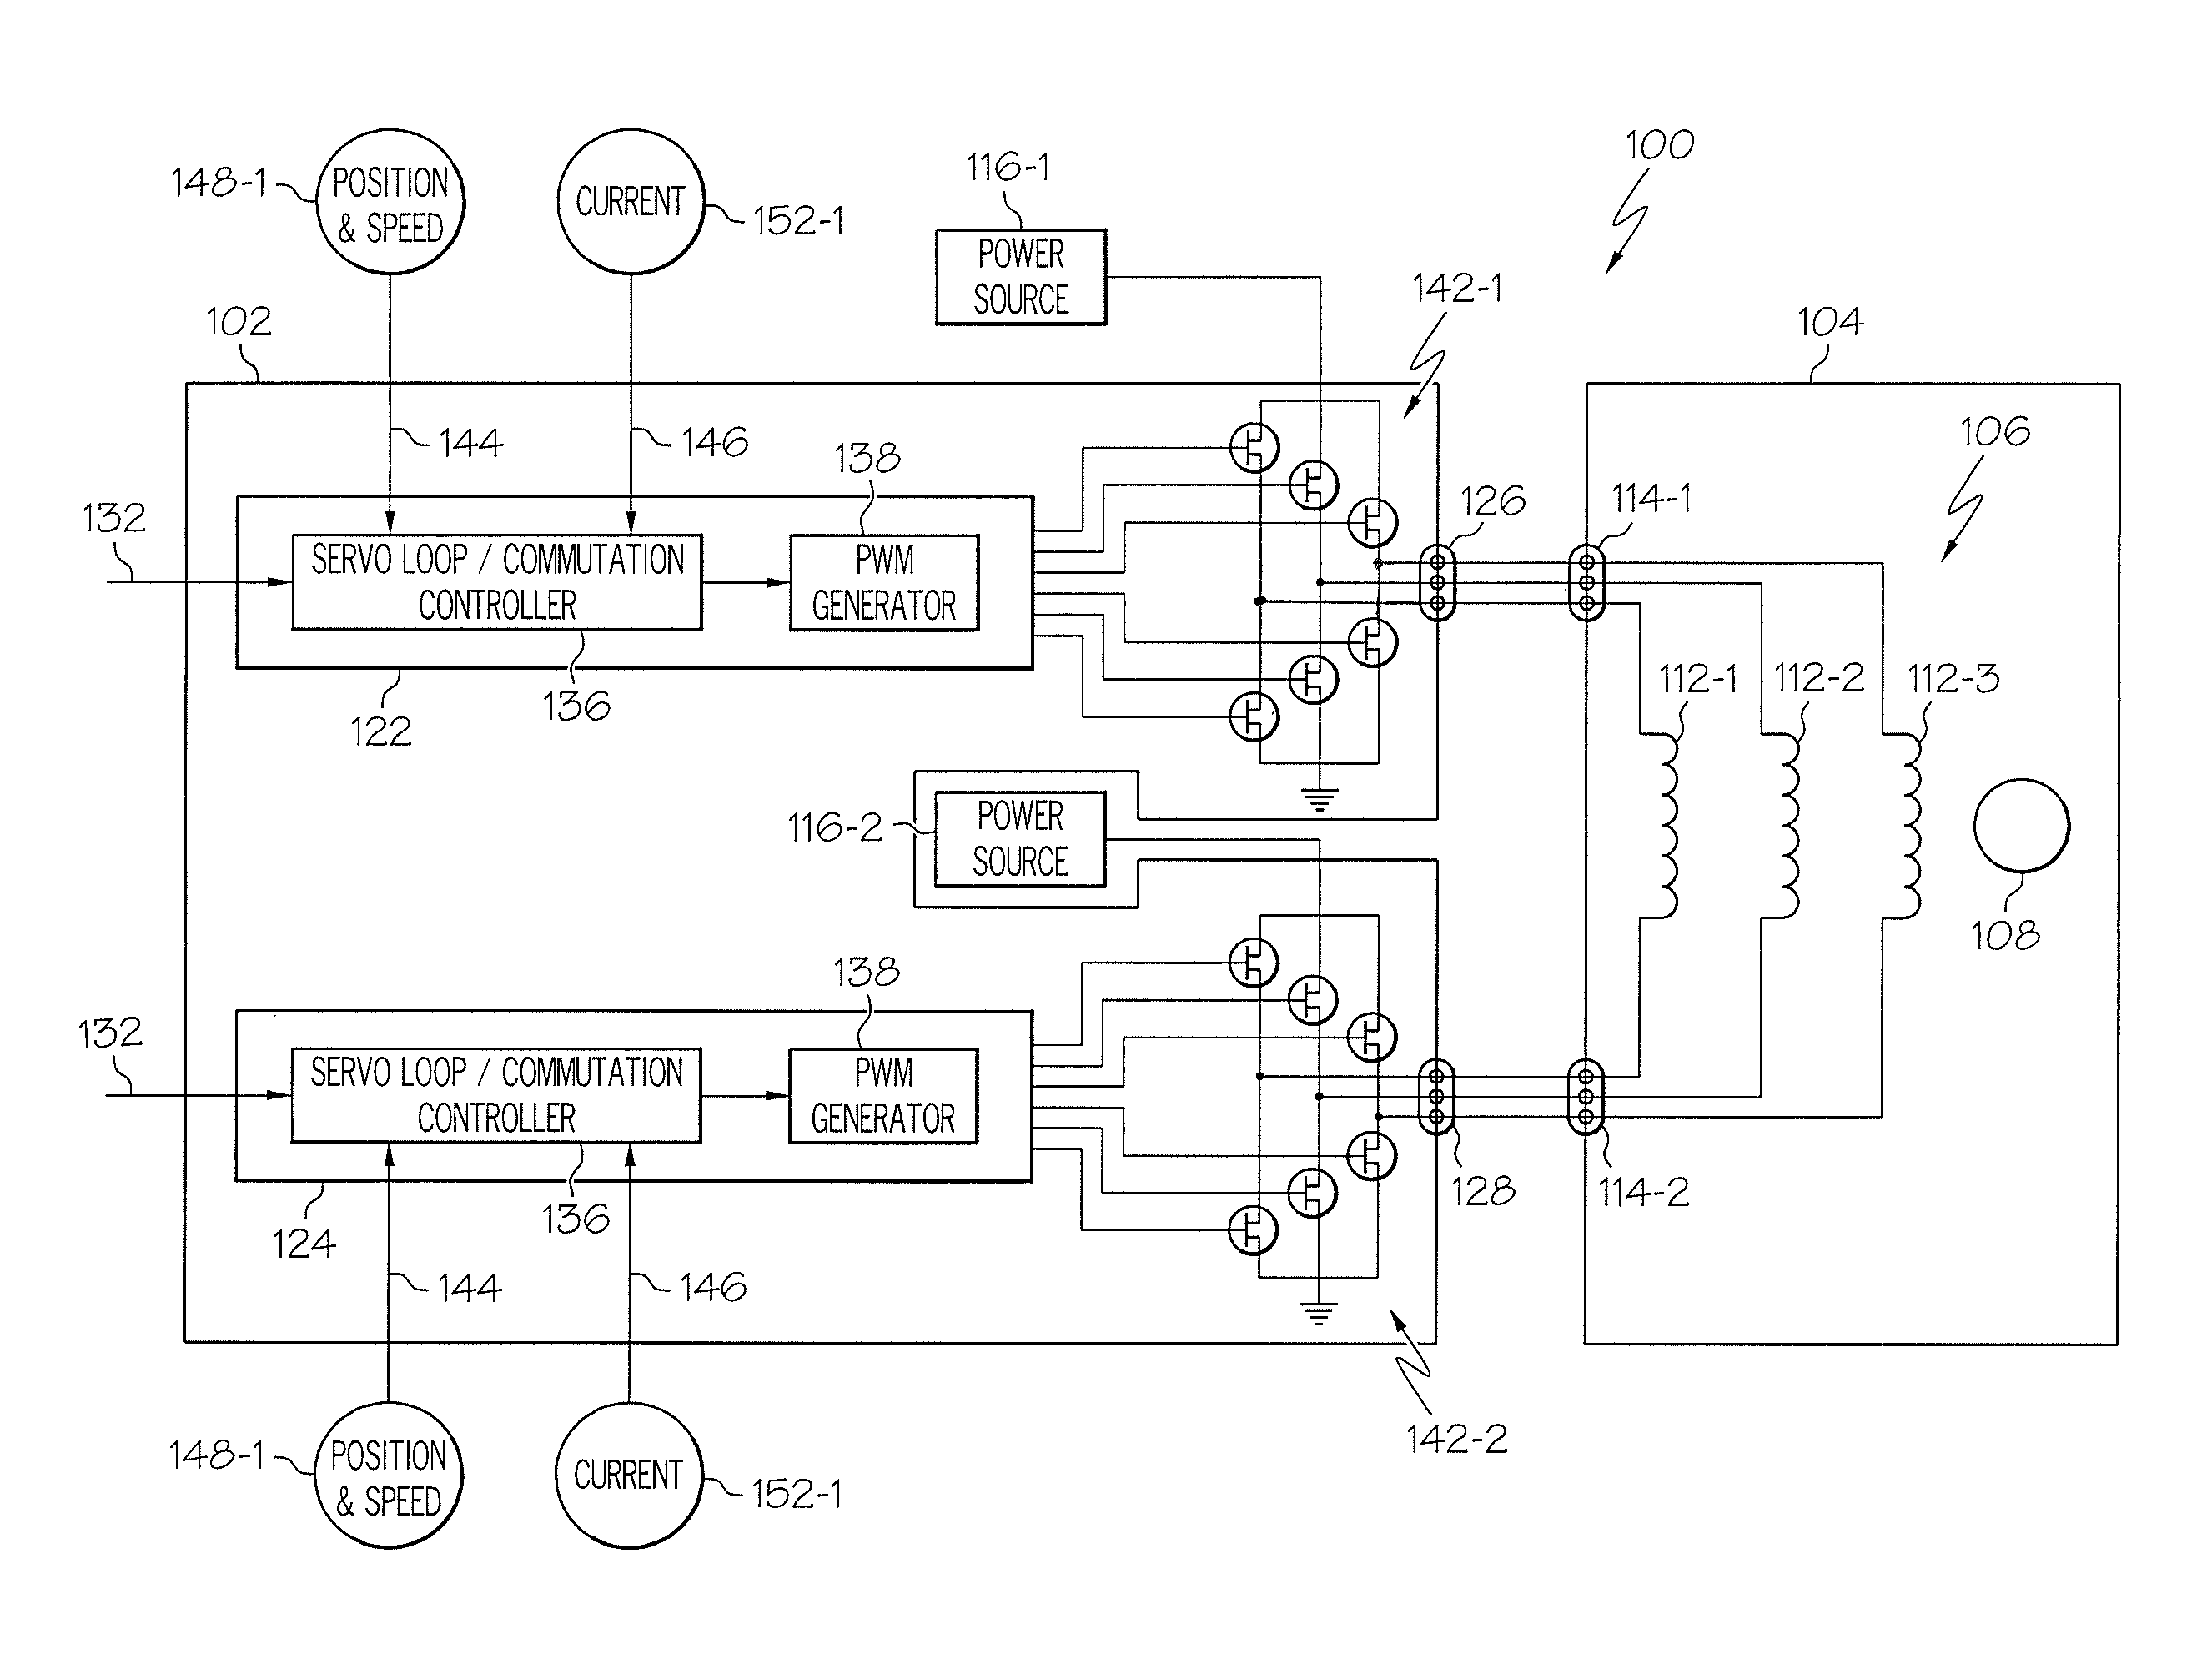 Dual lane control of a permanent magnet brushless motor using non-trapezoidal commutation control